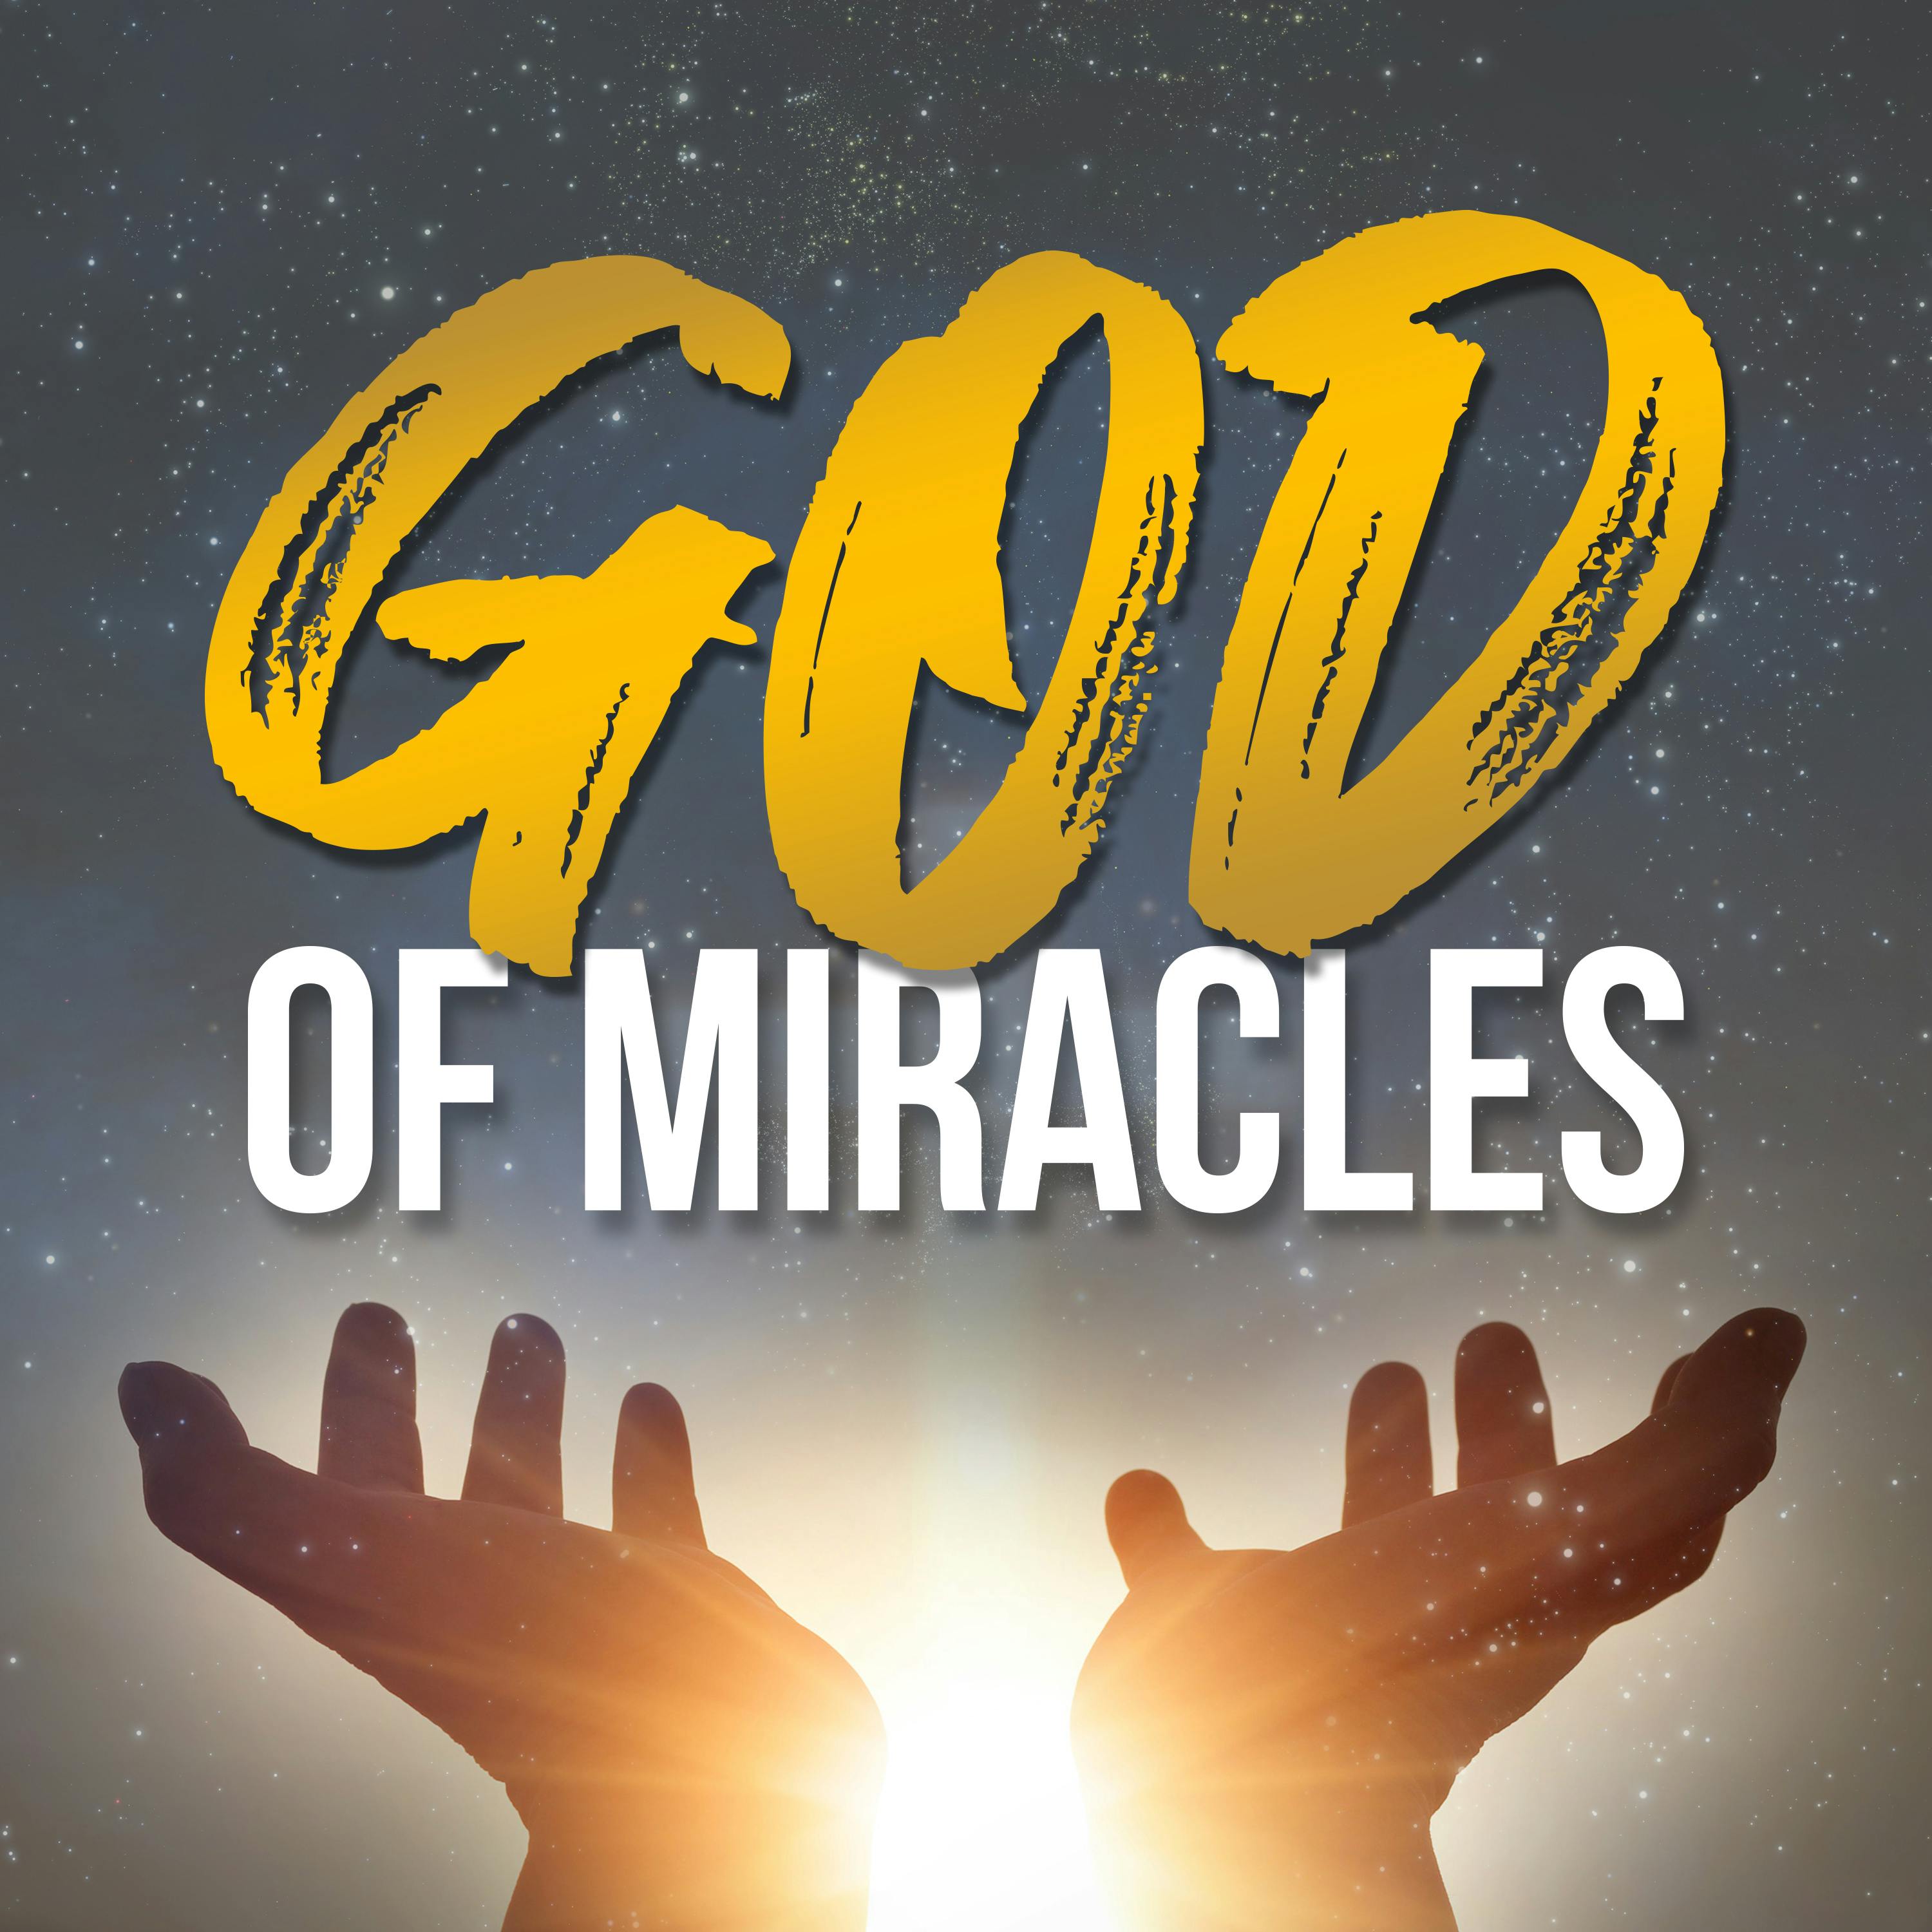 The Inspiration Behind "God of Miracles"